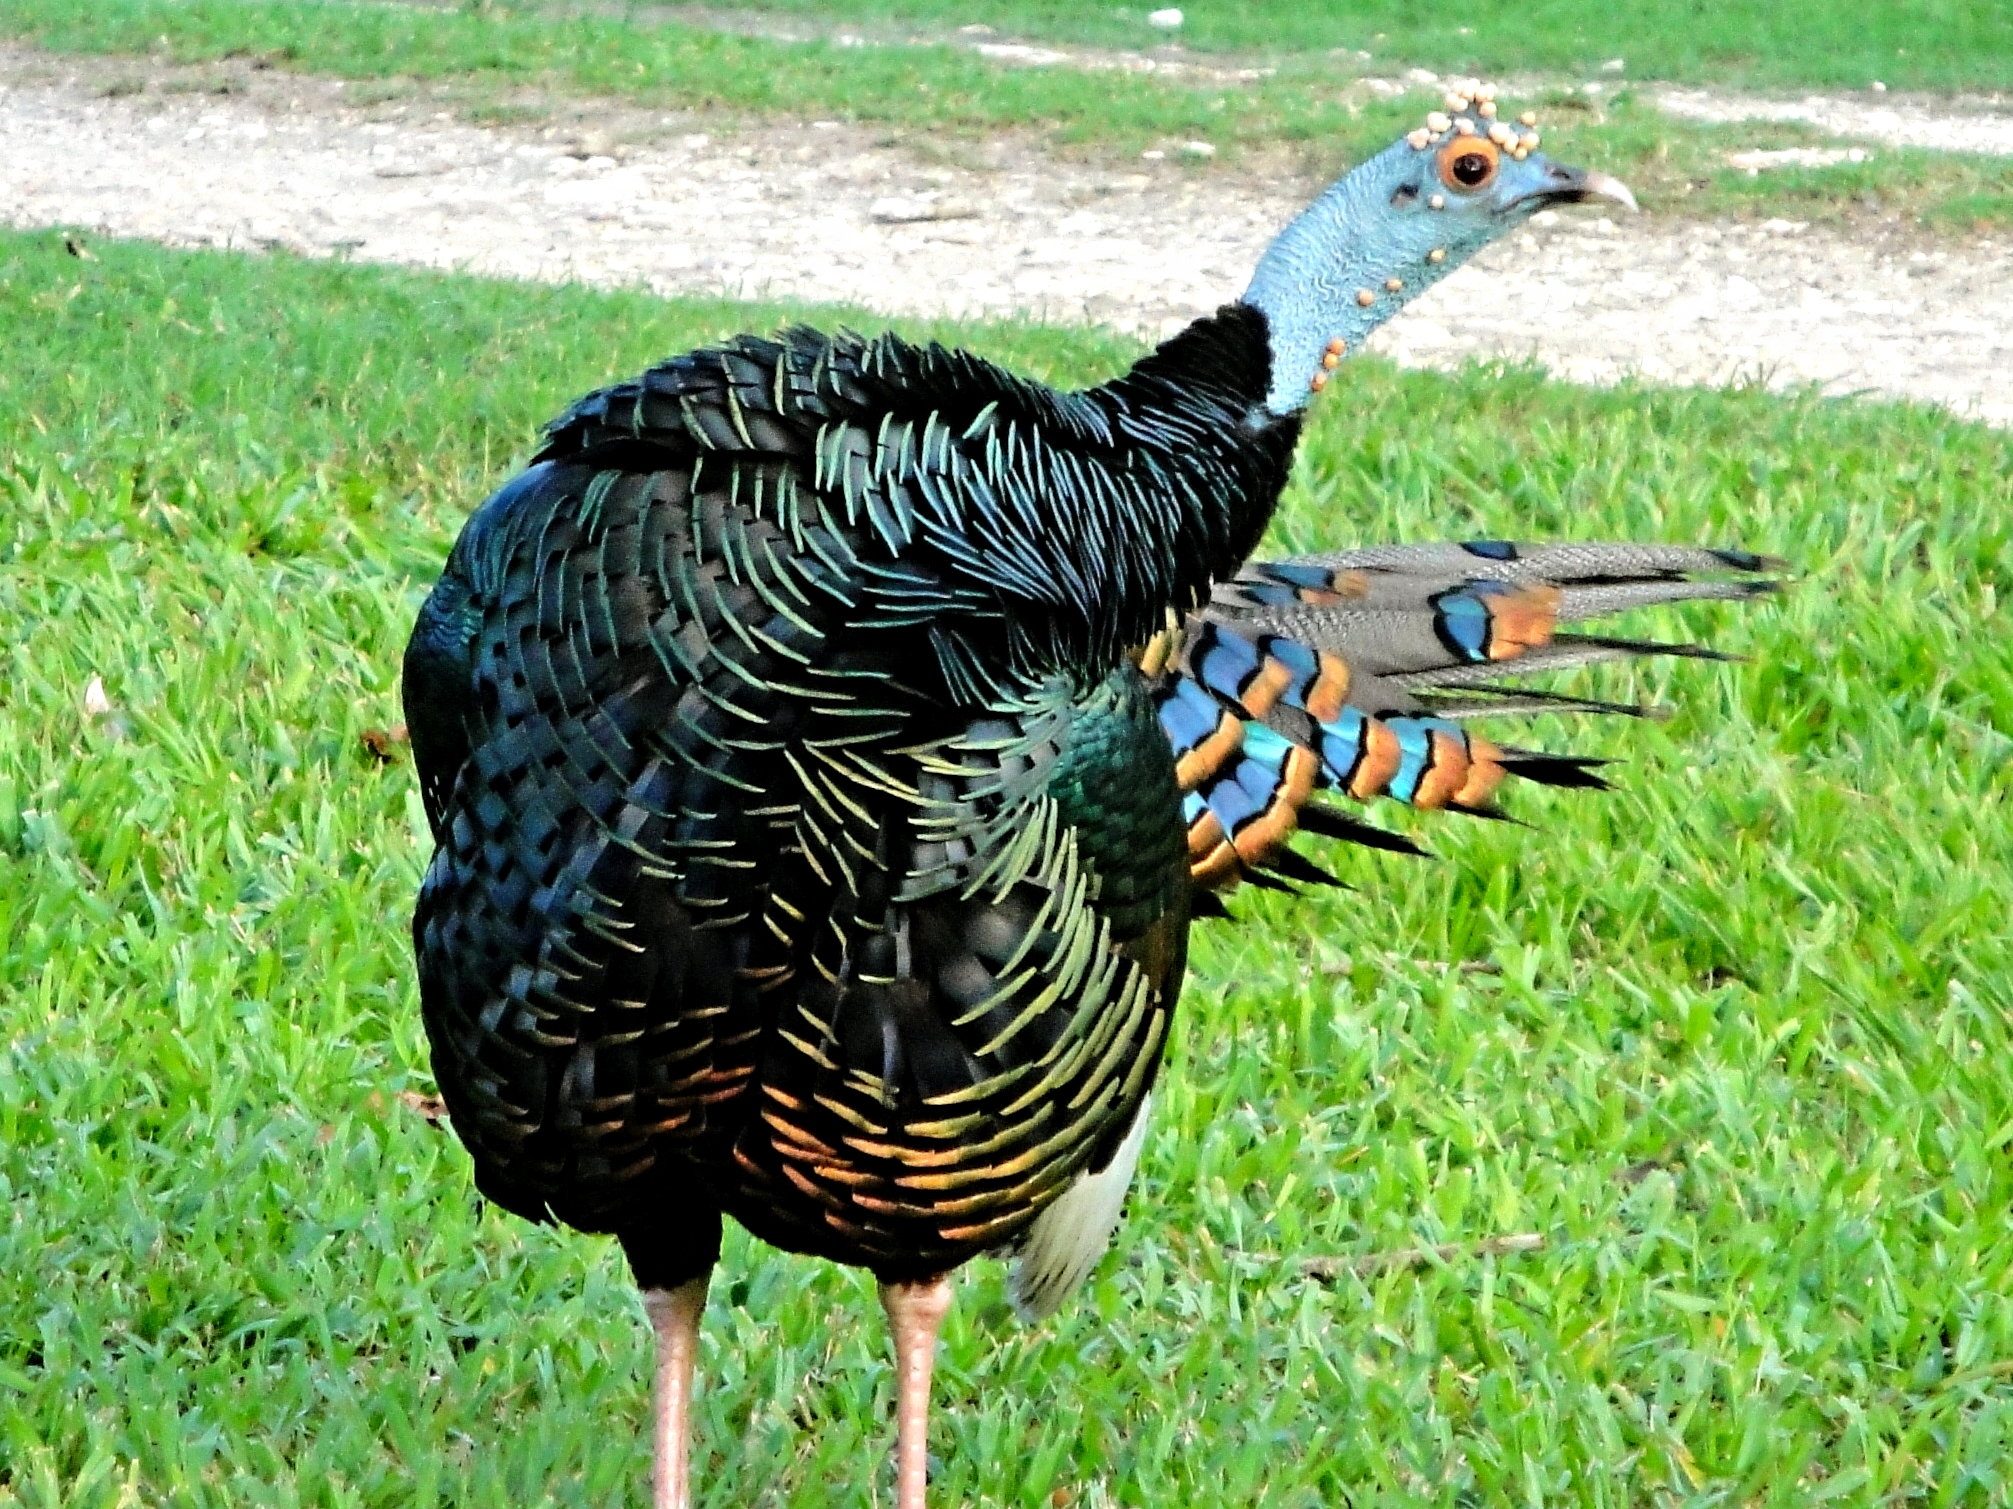 An Ocellated Turkey strikes a pose